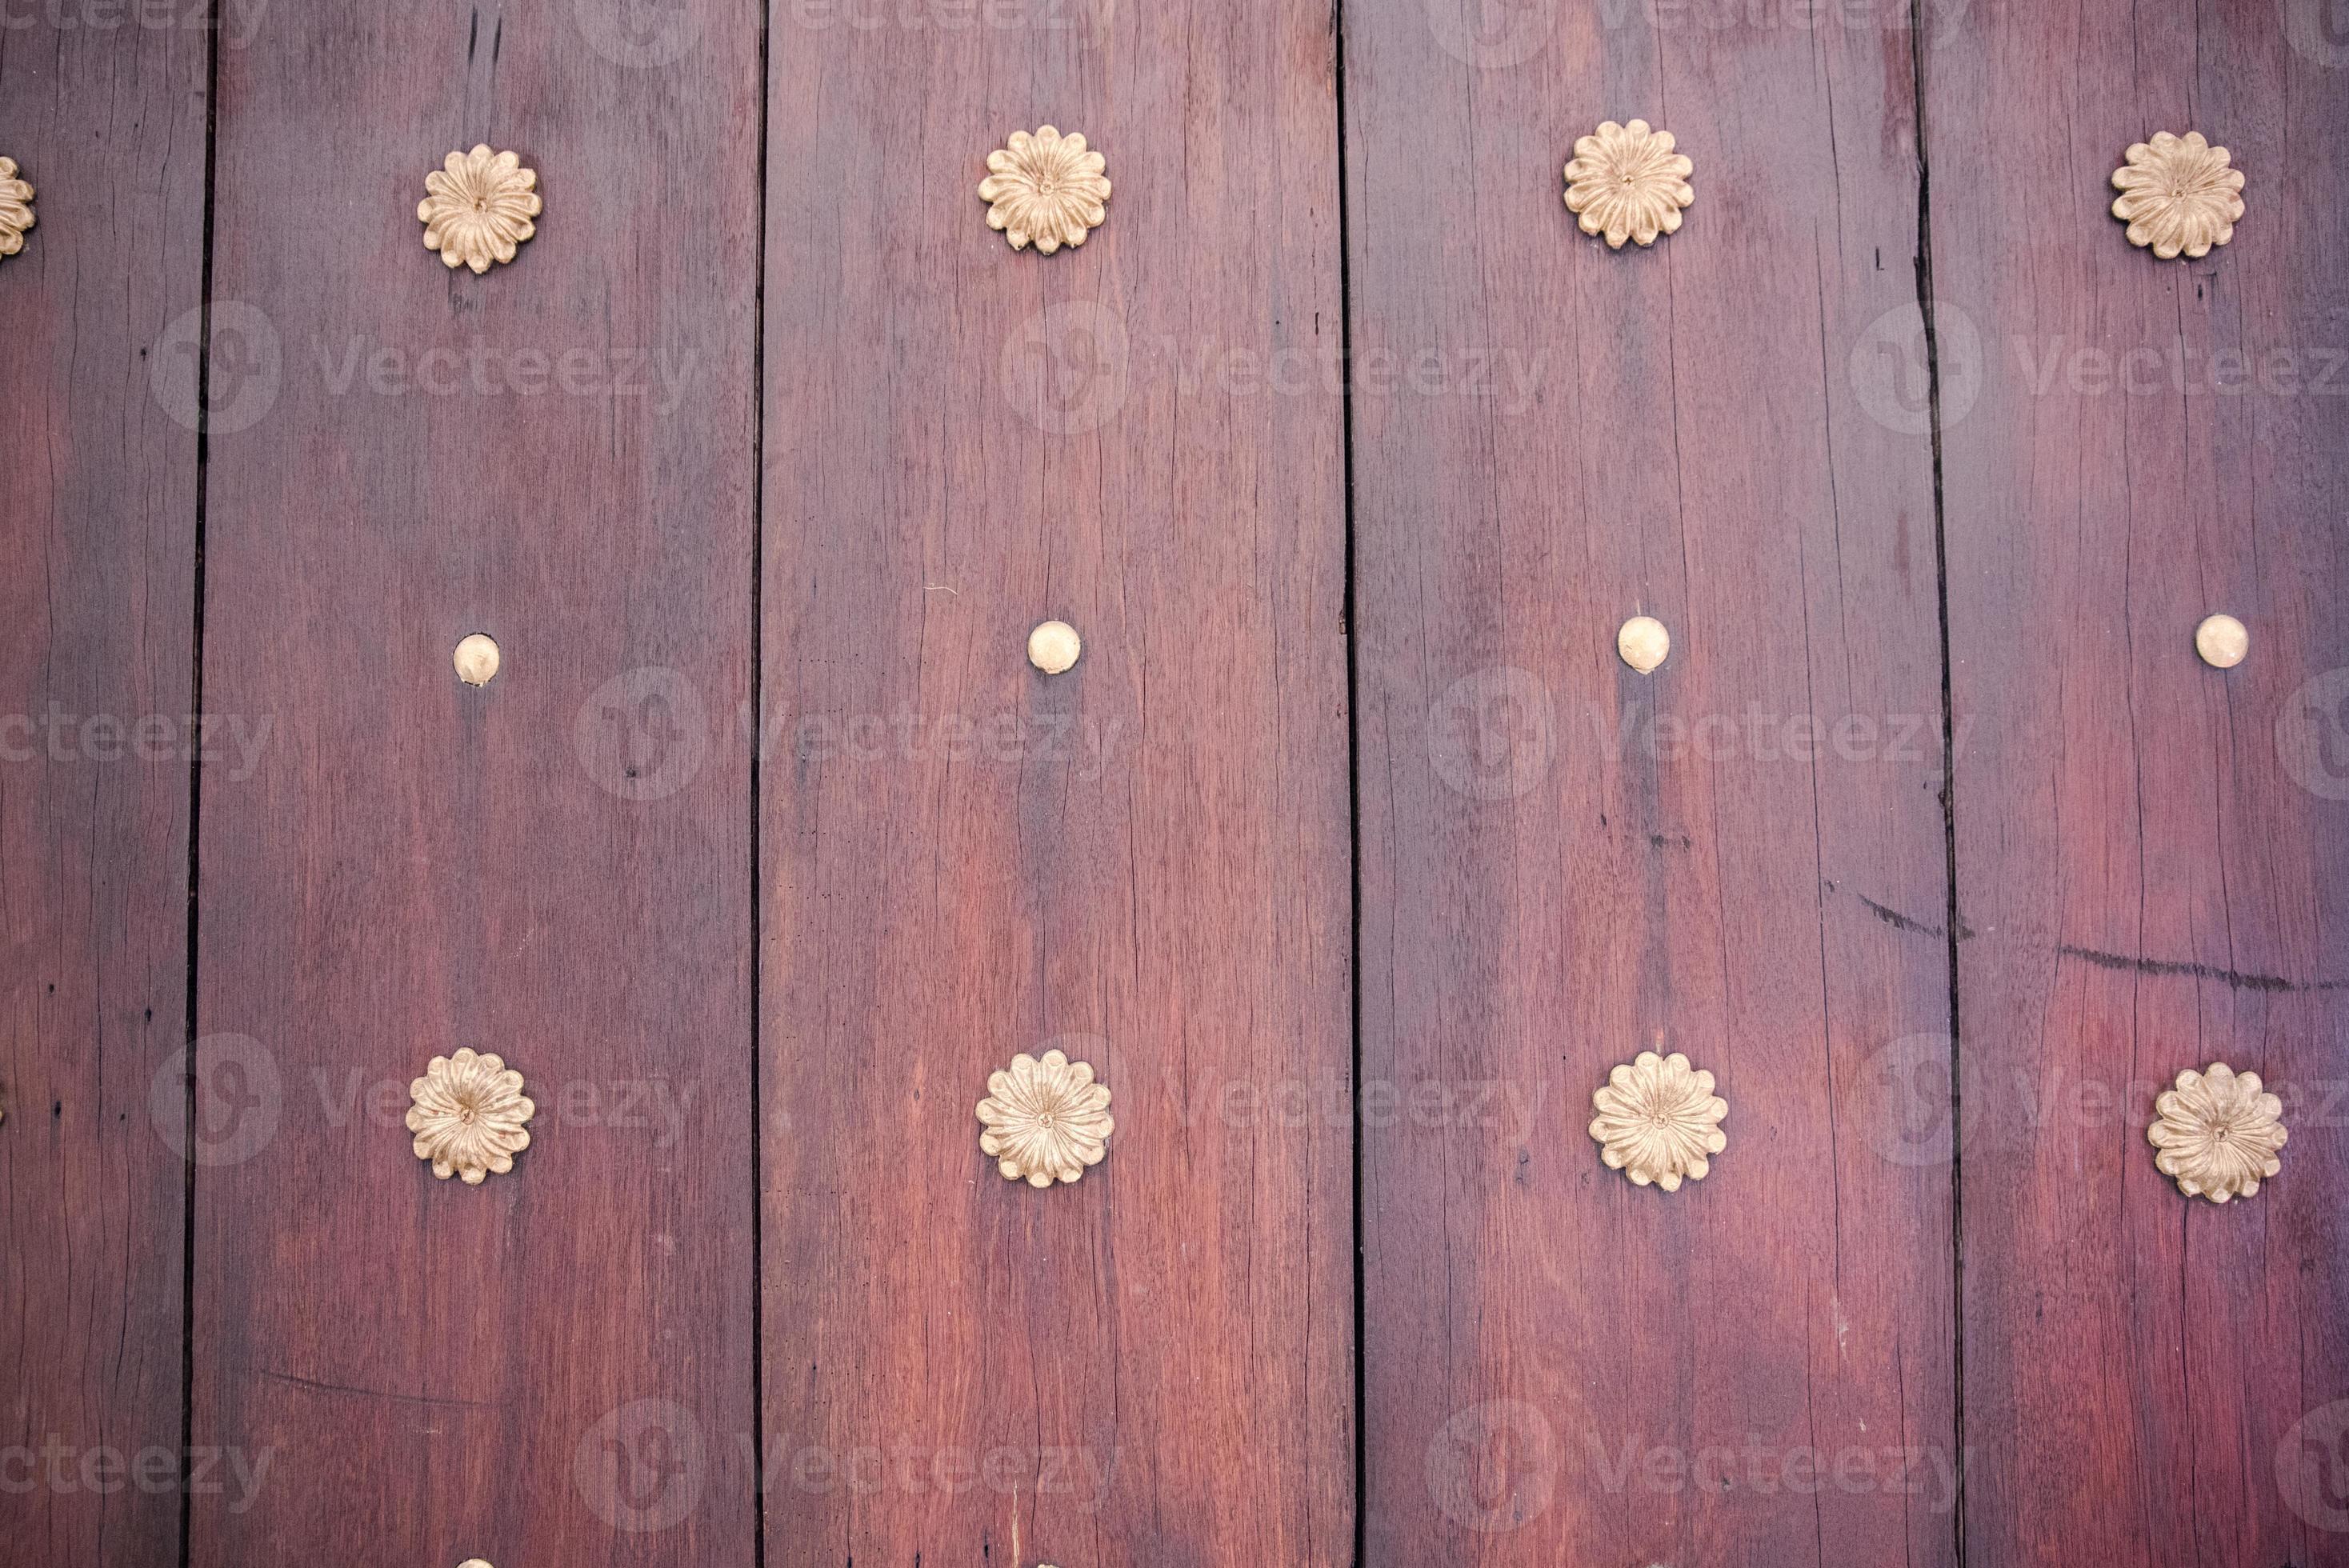 Vertical wood panel pattern with decorative metal fixture photo